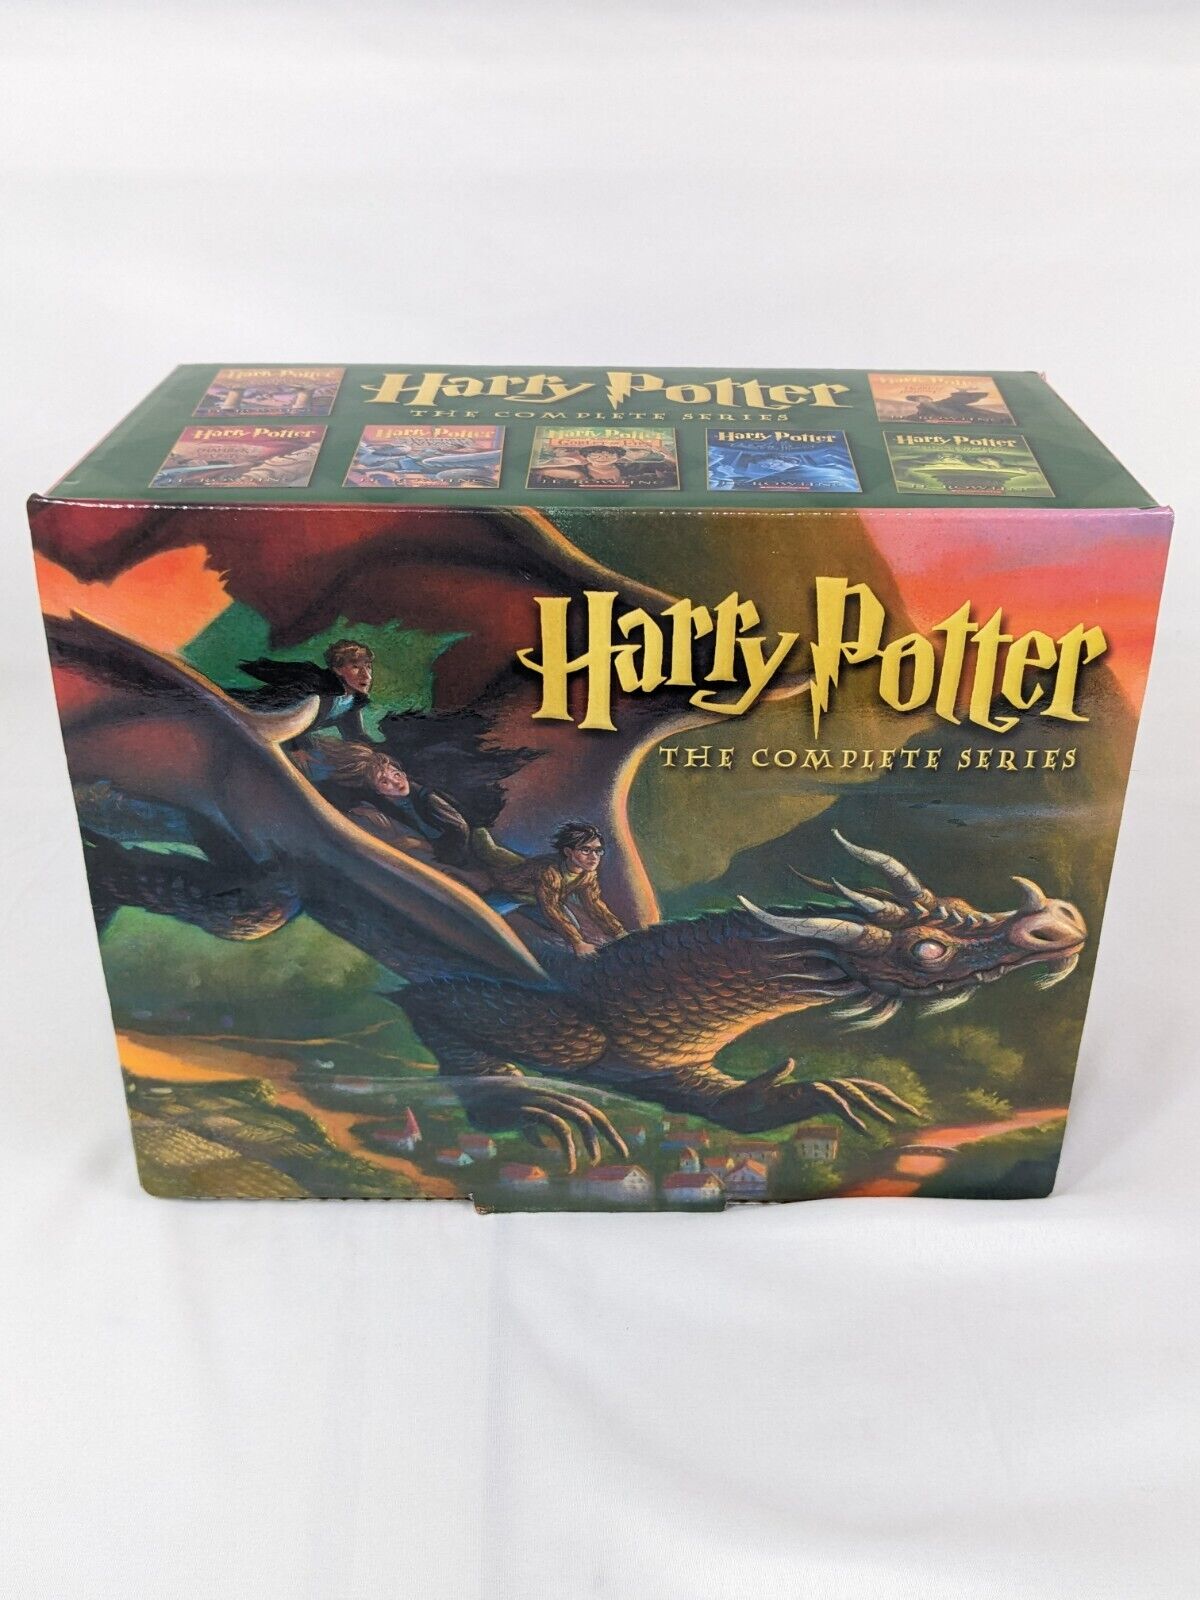 Scholastic Harry Potter The Complete Book Series by JK Rowling SET OF 7